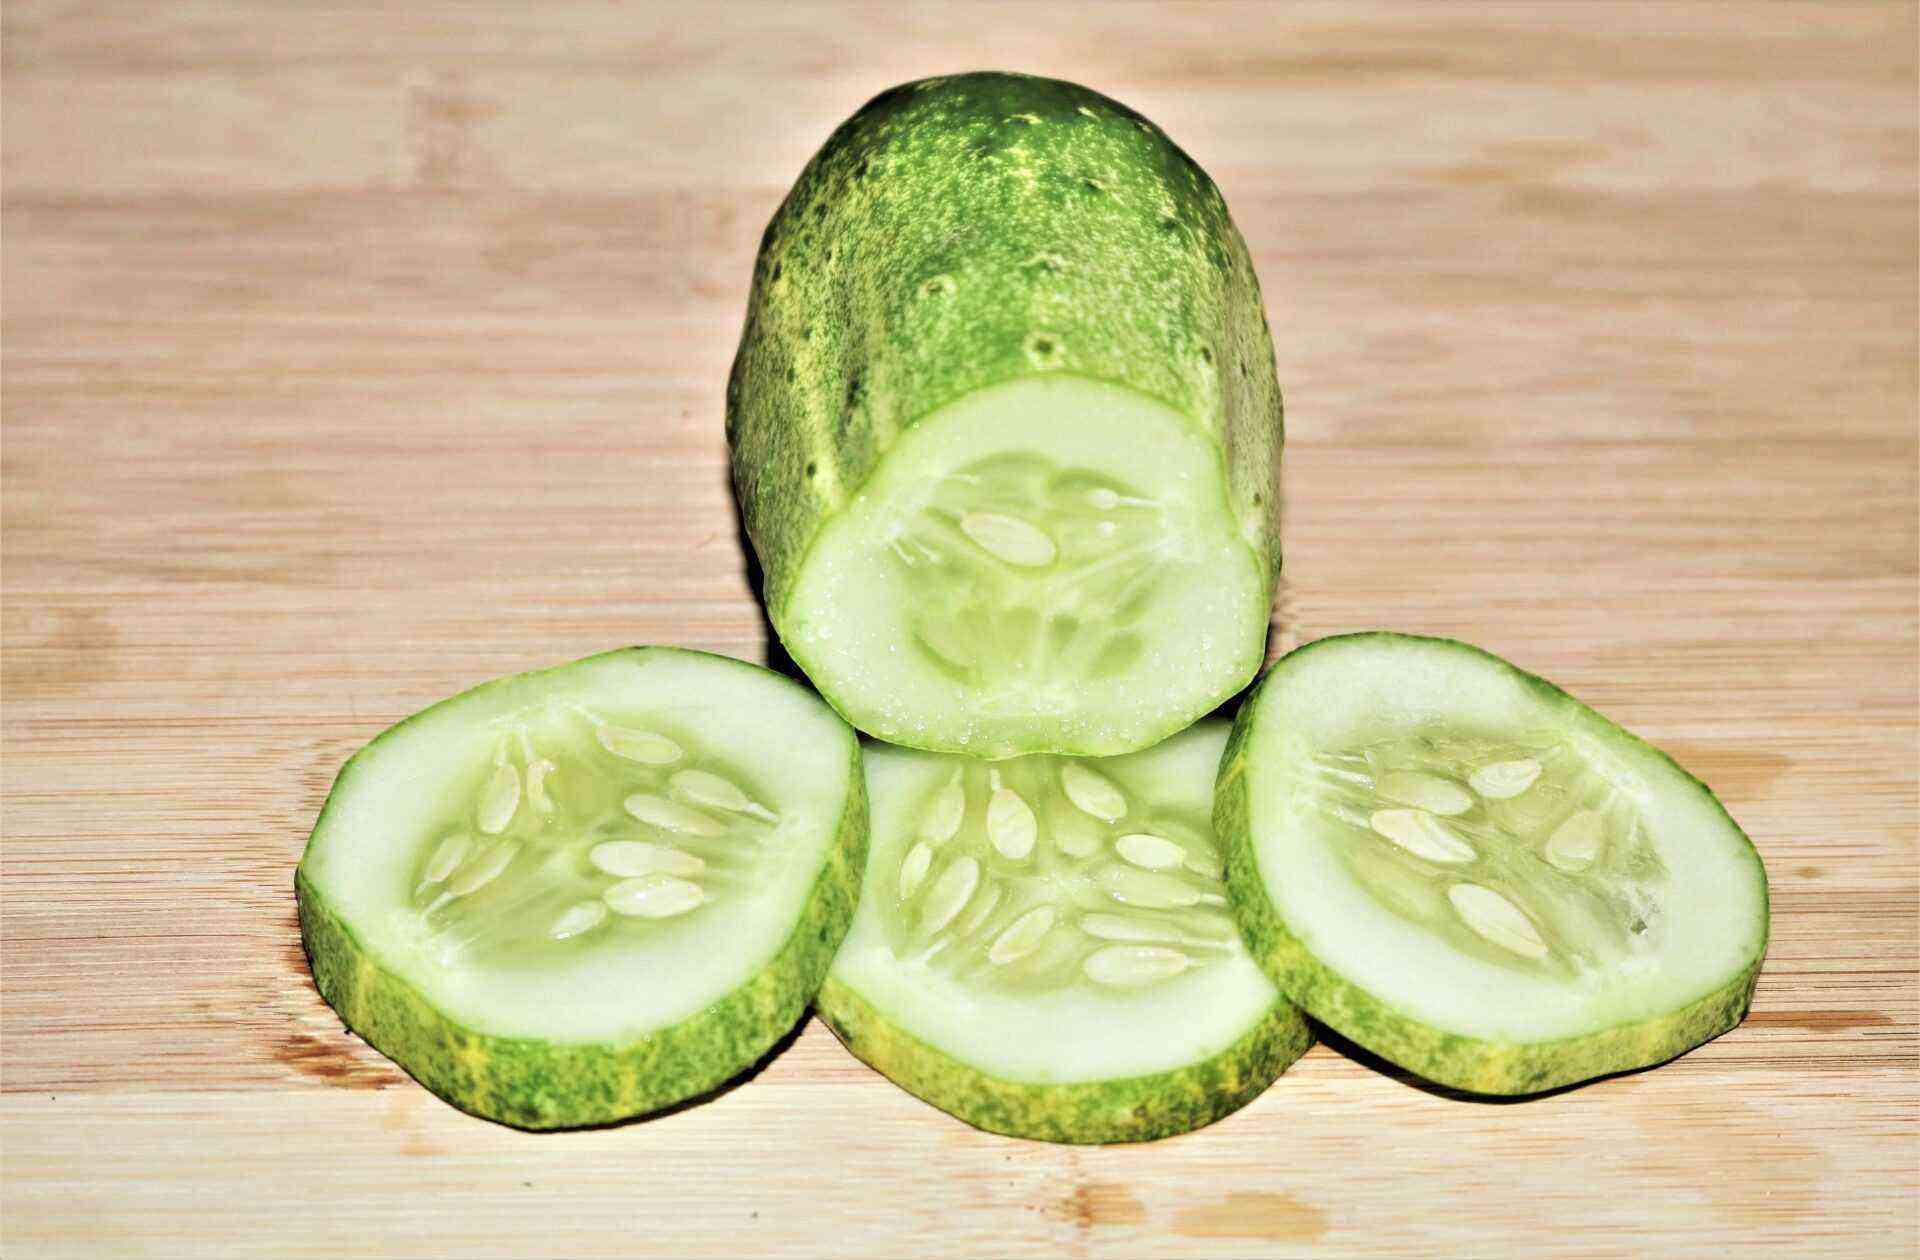 From which cucumber fruits - male or female - to choose seeds?